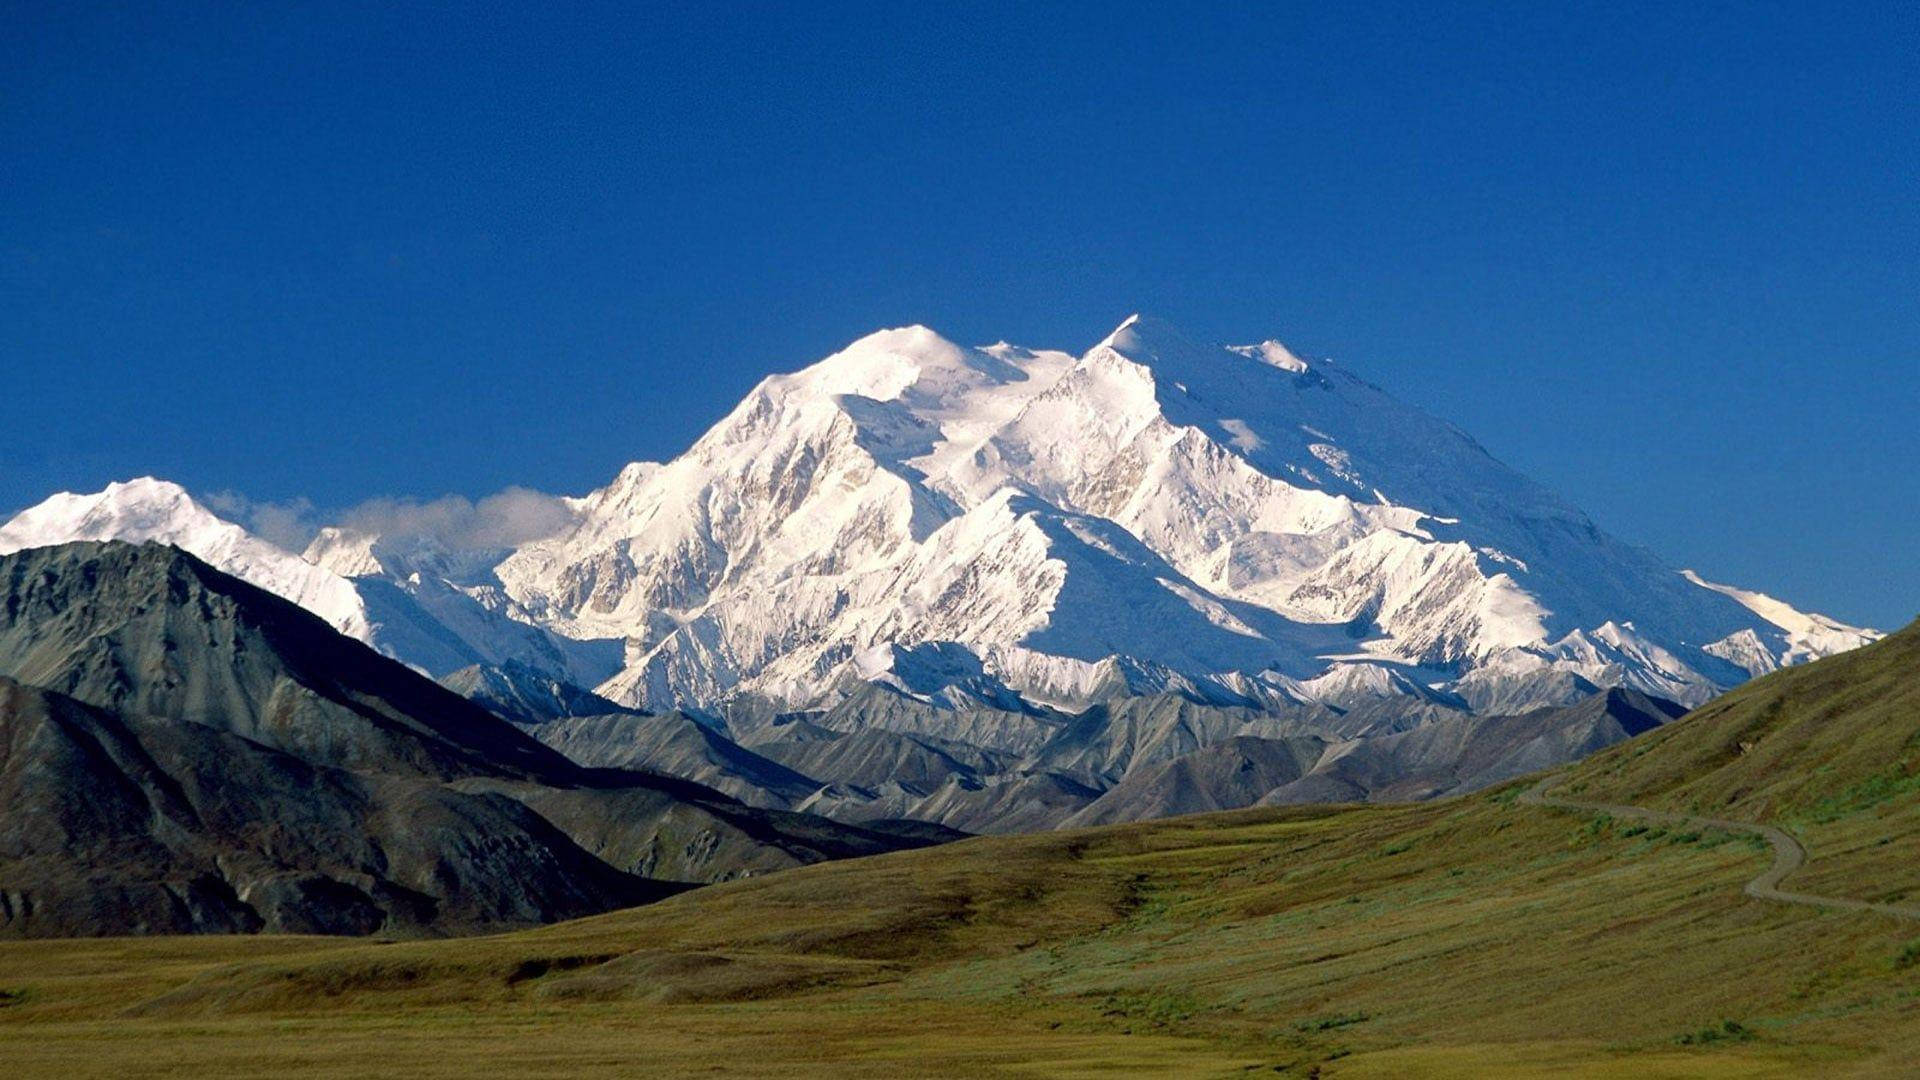 Majestic Denali Towering Above Green Fields Background